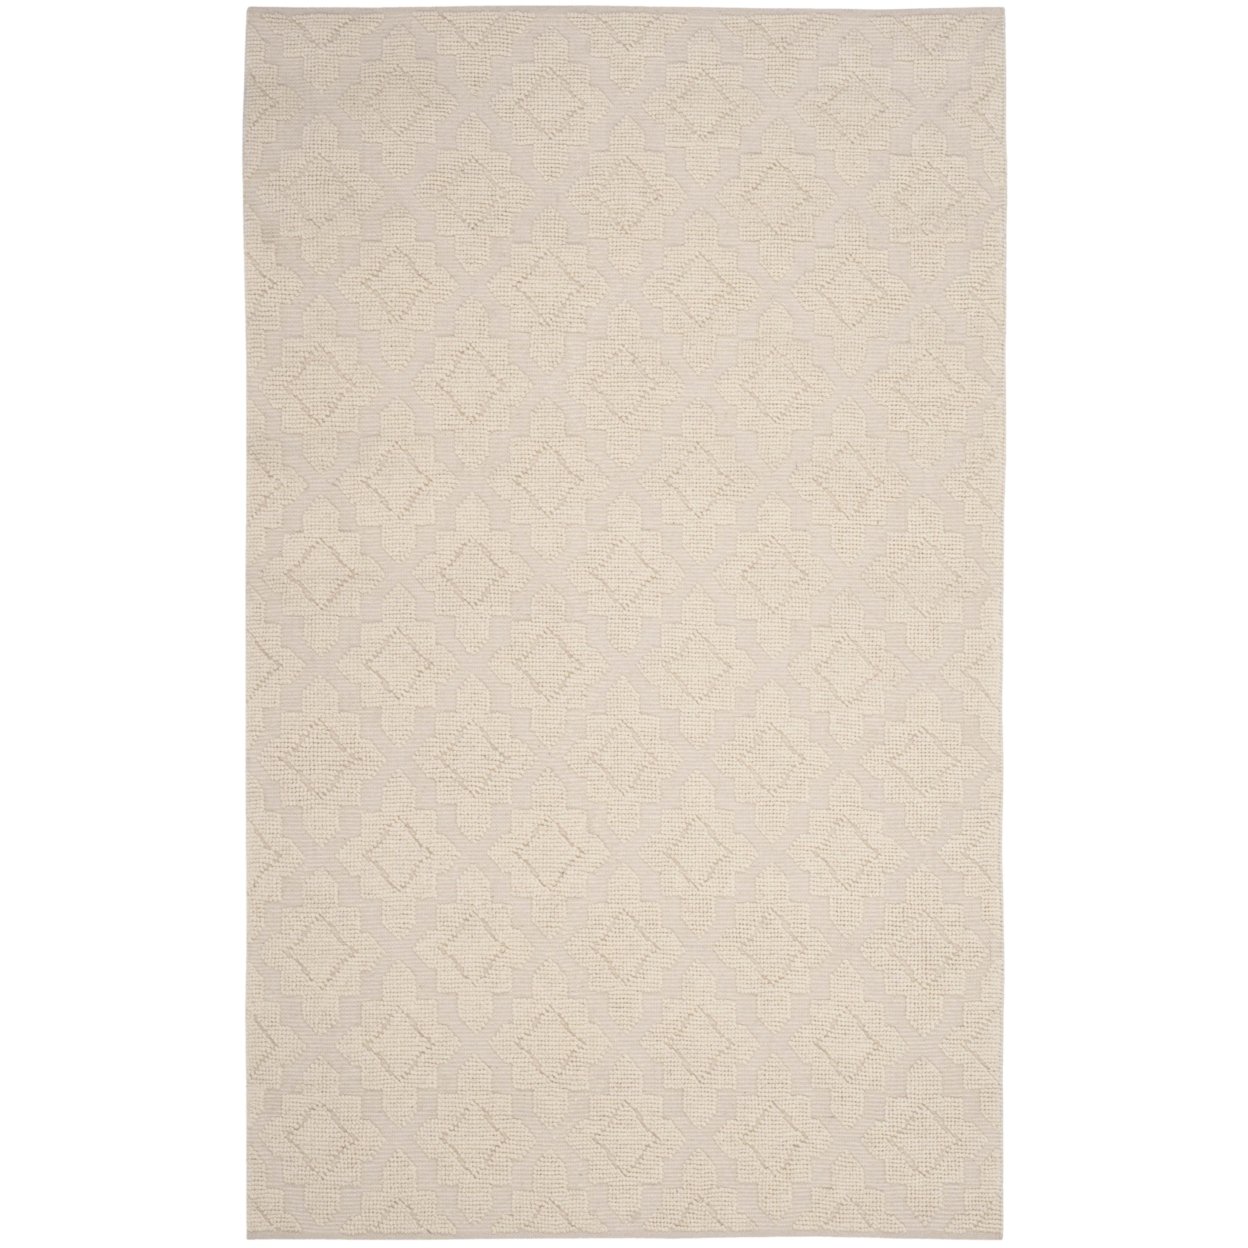 SAFAVIEH Vermont Collection VRM103A Handwoven Ivory Rug - 5 X 8